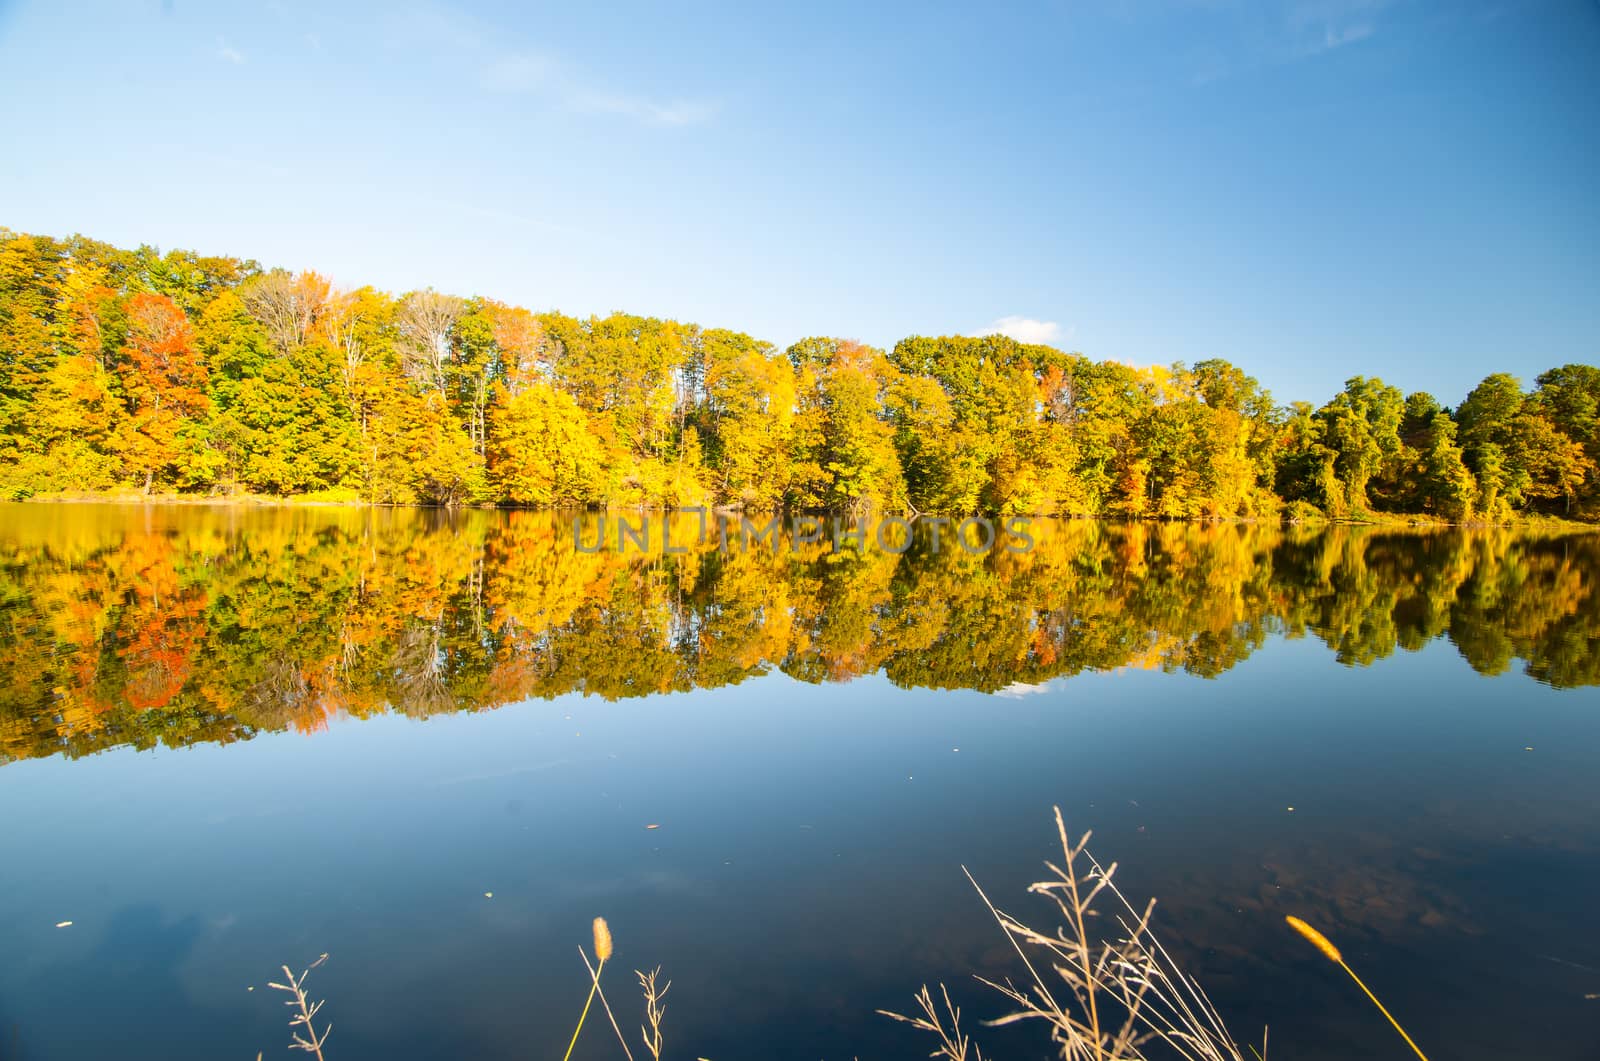 Beautiful Connecticat River lined by autumn foliage forest near  by brians101